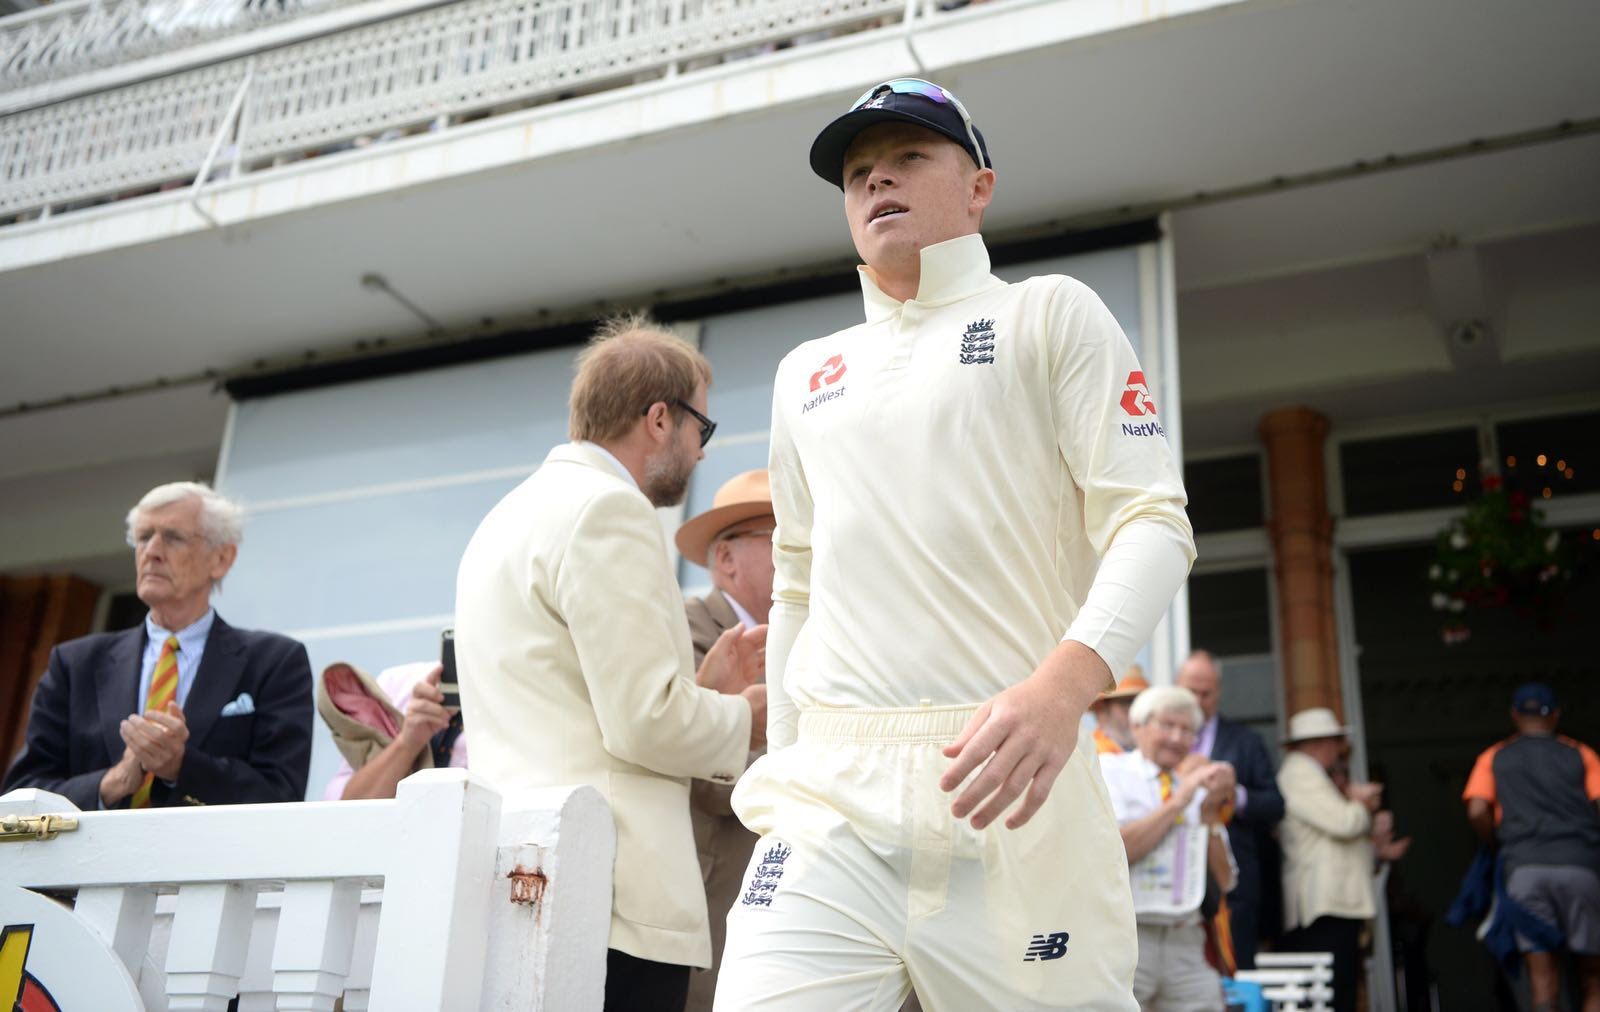 Why Ollie Pope will field with camera on helmet in Edgbaston Test vs India